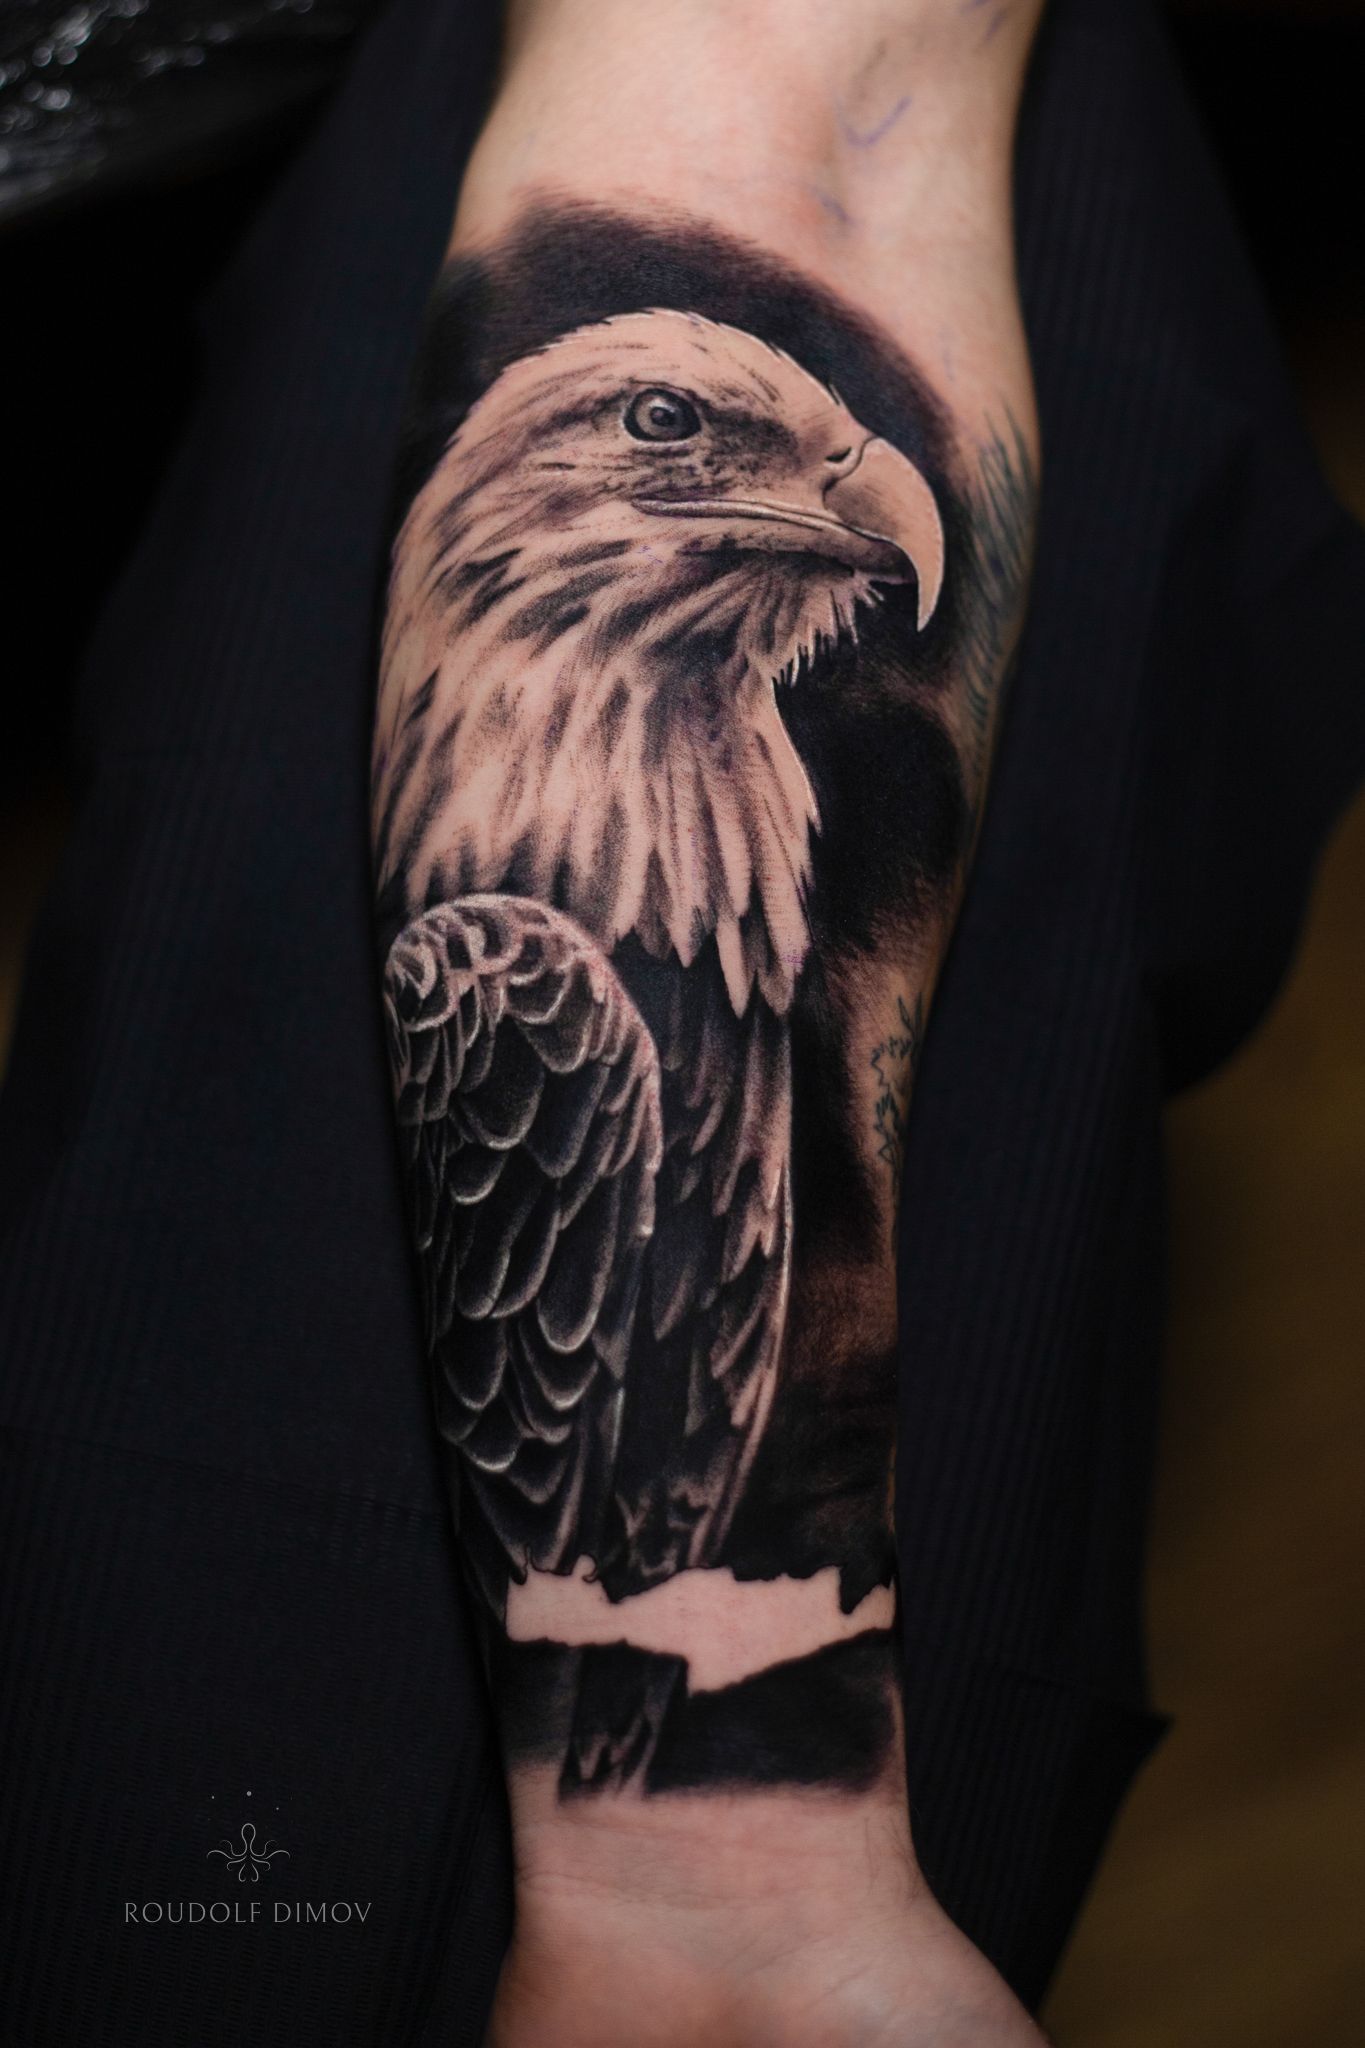 Vienna Electric Tattoo - Harpy Eagle done by @samrulz She has time